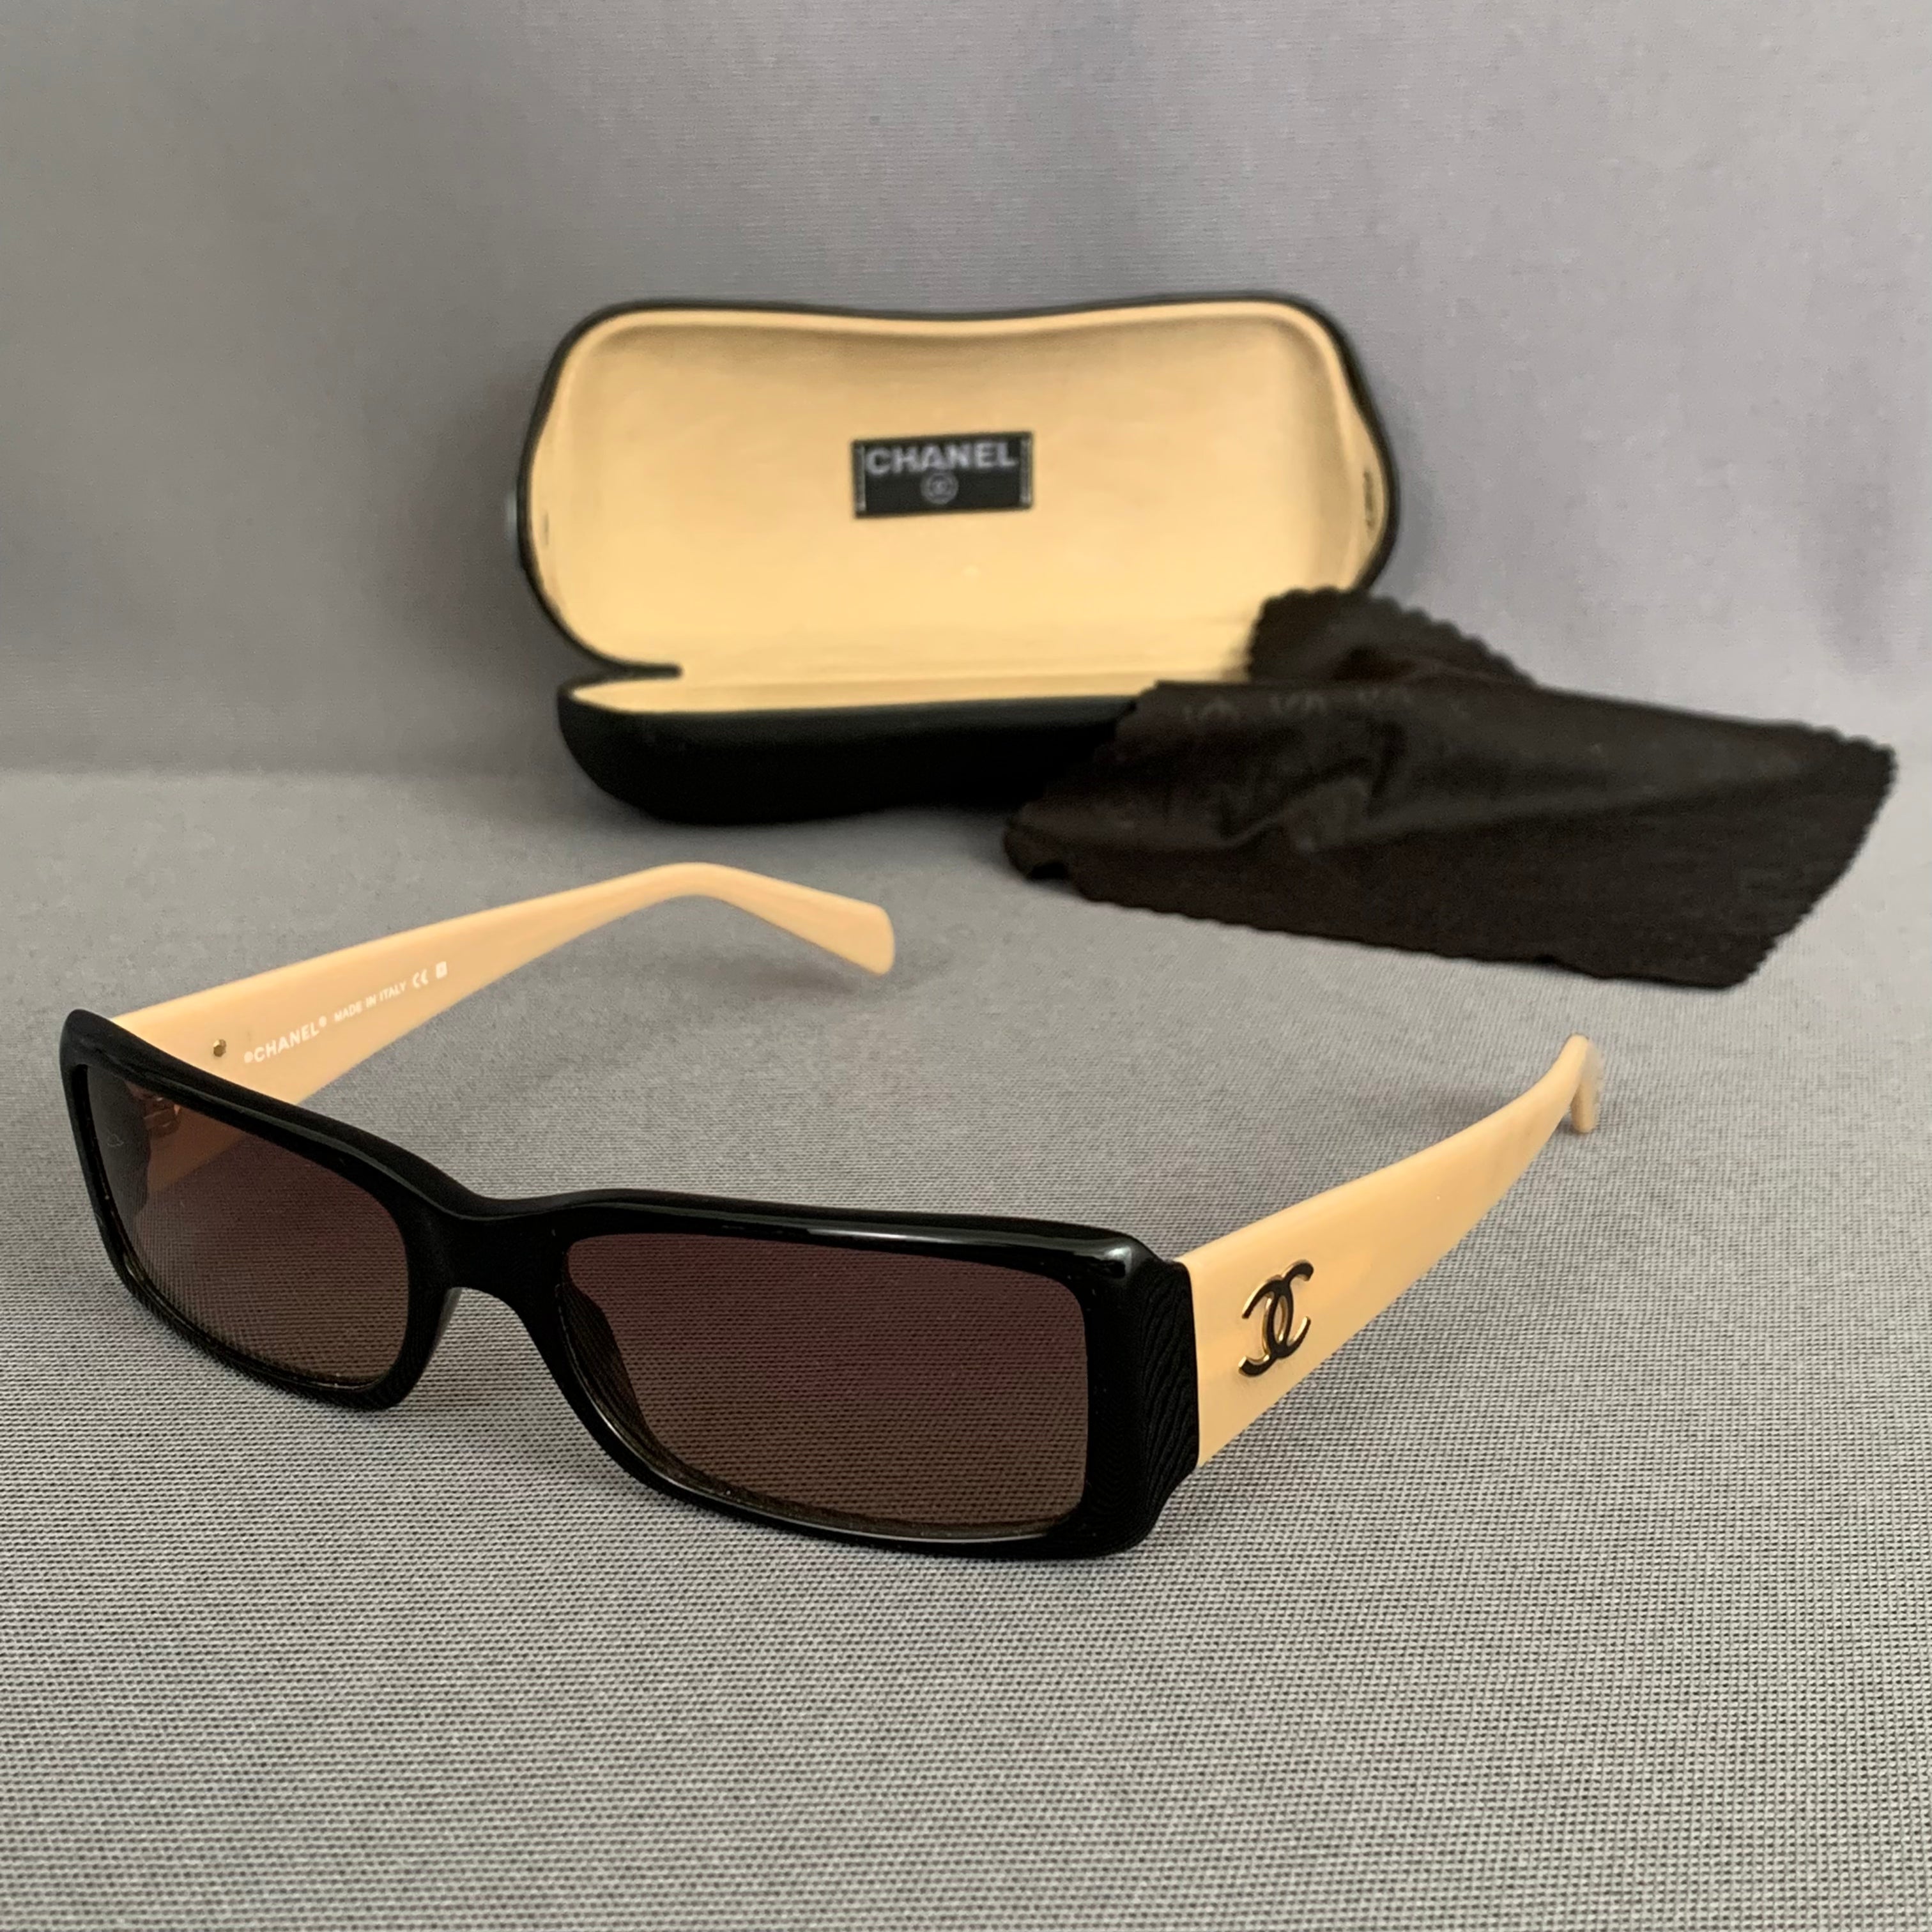 CHANEL SUNGLASSES with Case & Cloth - Made in Italy - 5078 c.817